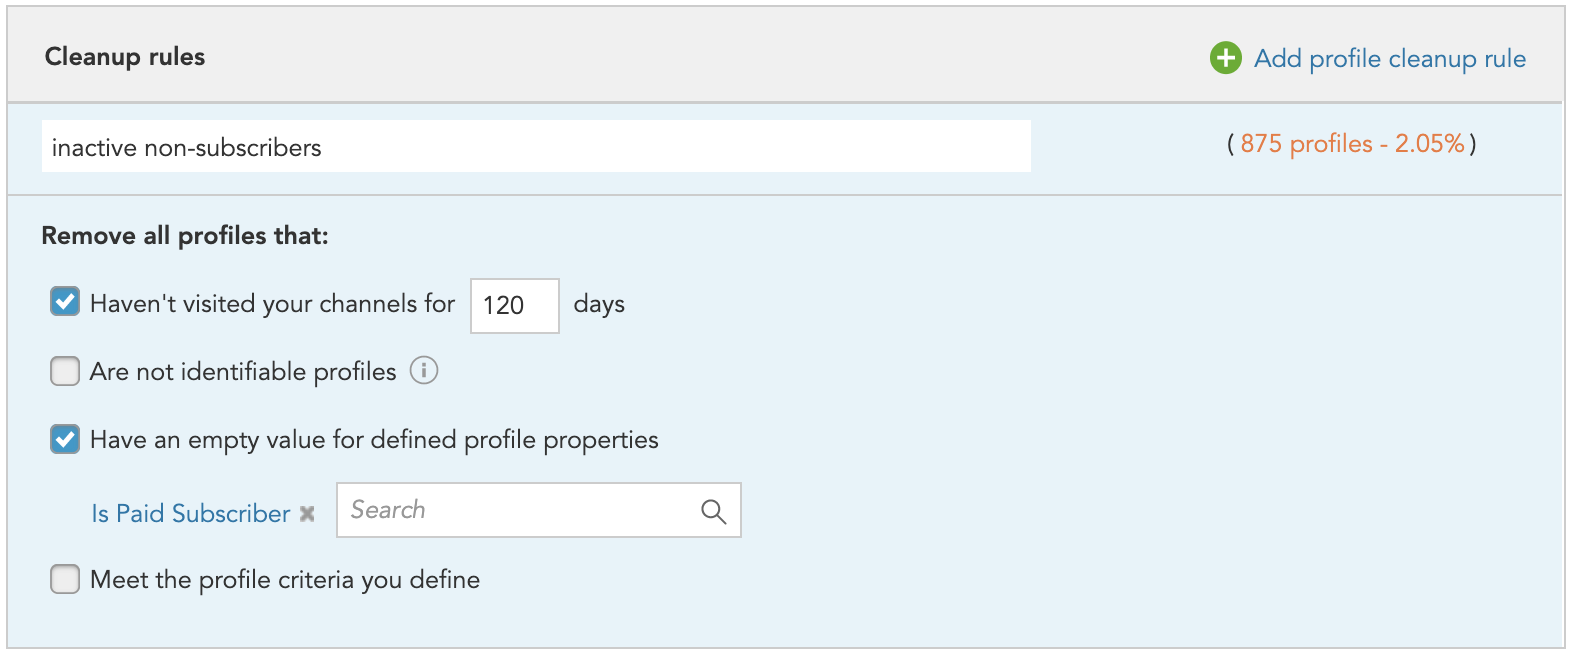 How to remove profiles and reduce the number of customer profiles in BlueConic